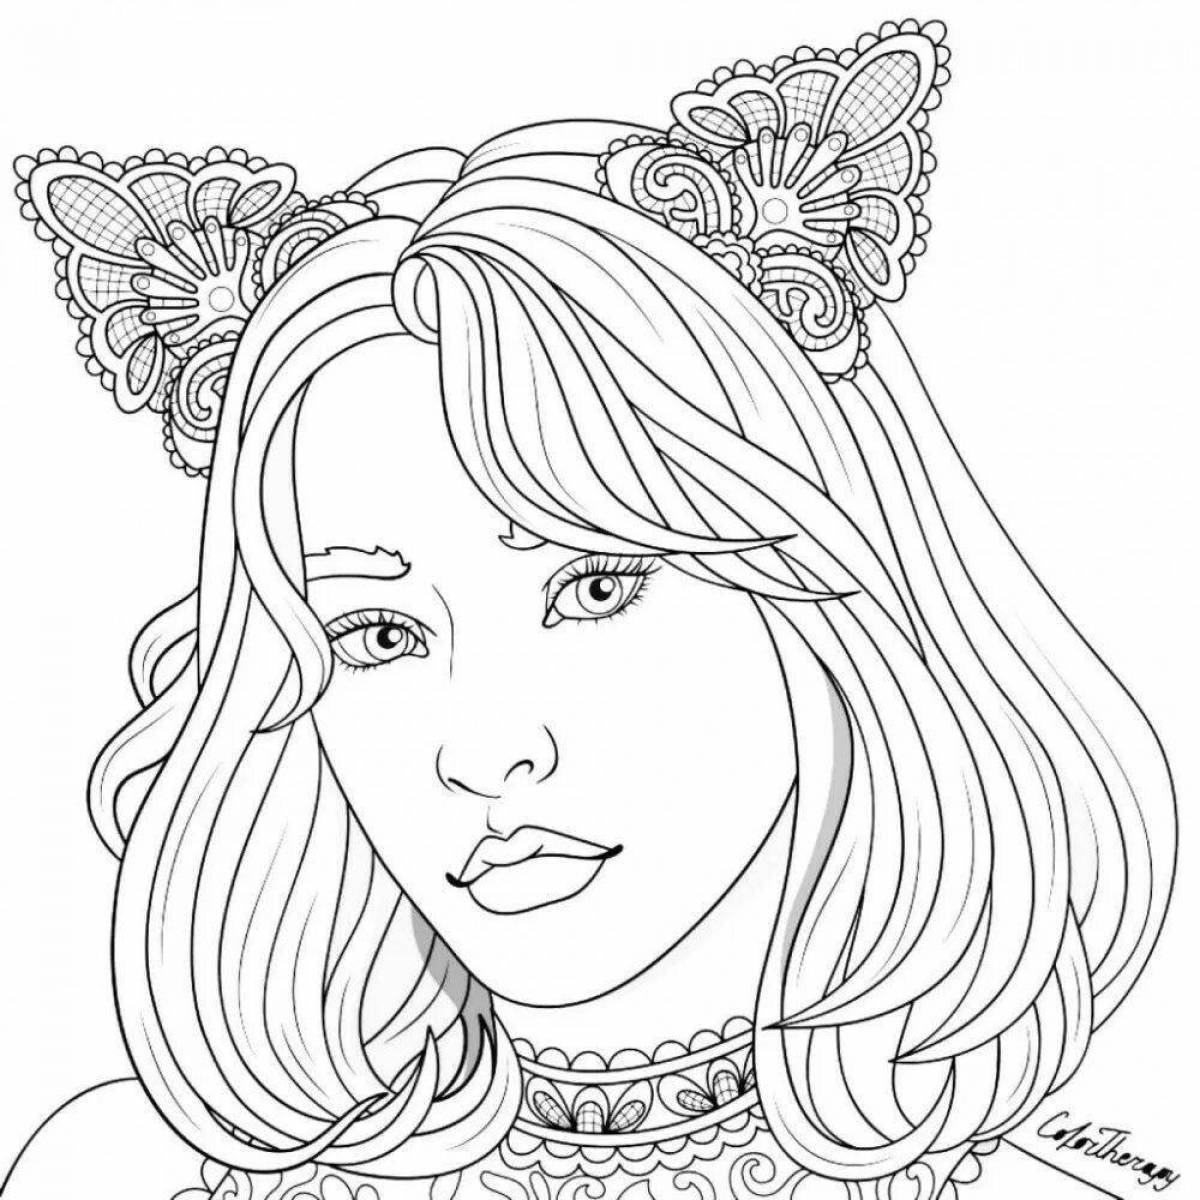 Relaxing anti-stress wildberry coloring book